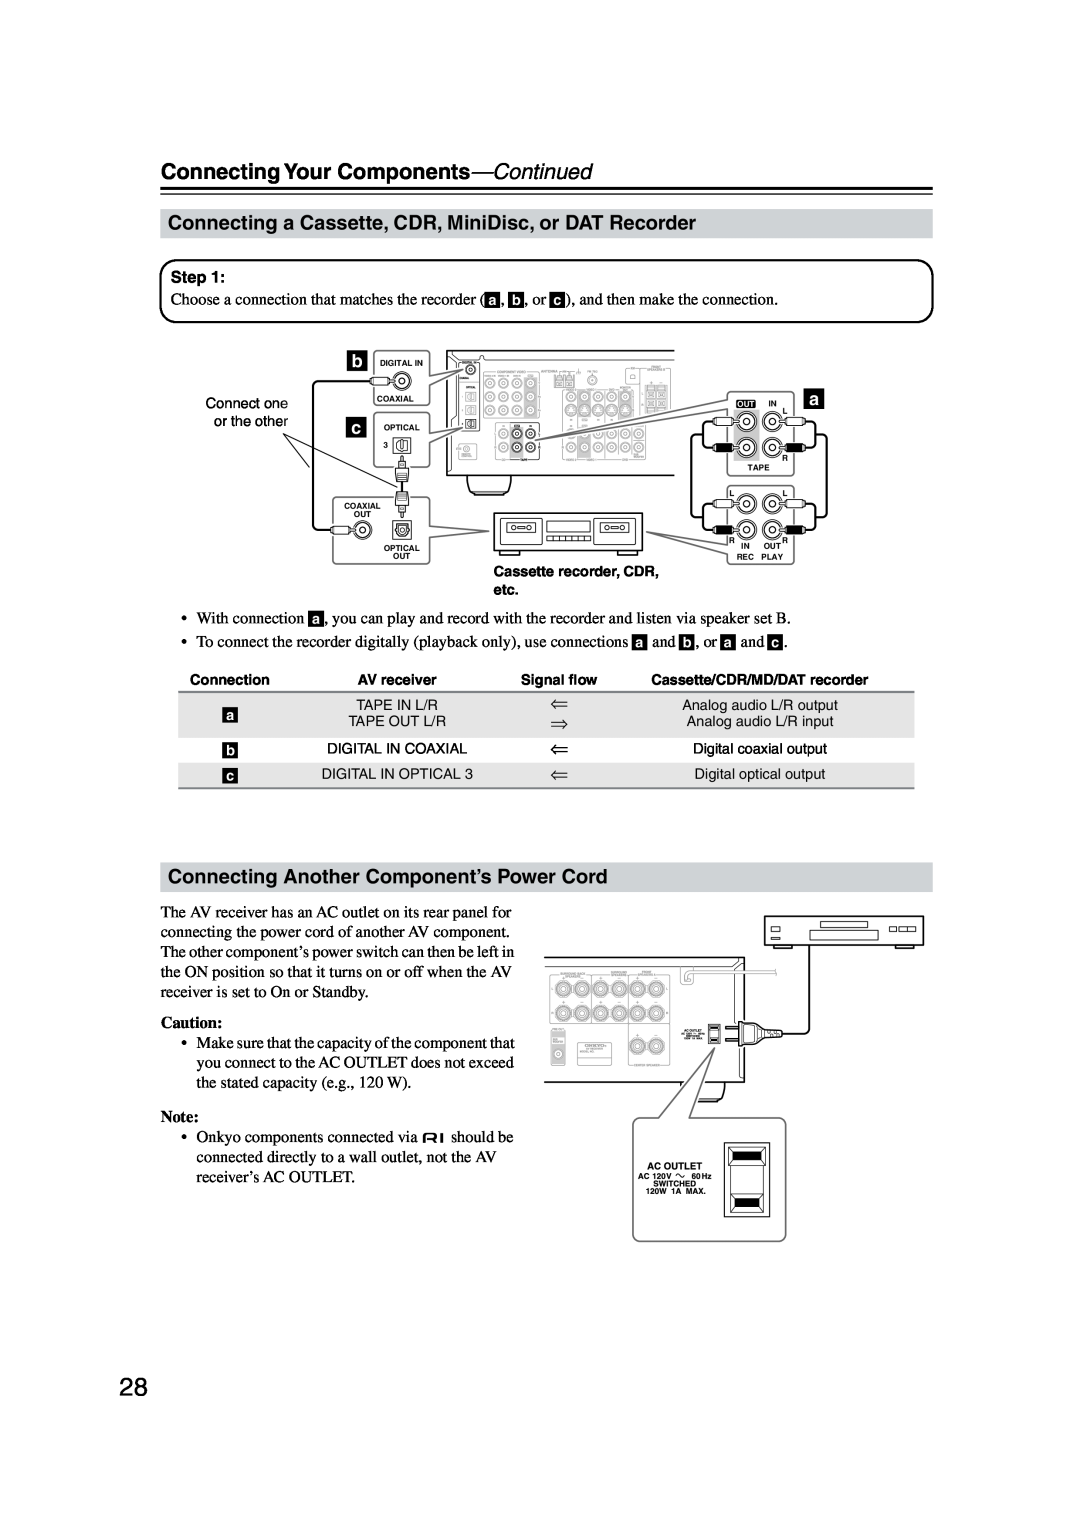 Onkyo TX-SR573 instruction manual Connecting Another Component’s Power Cord, Connecting Your Components—Continued 